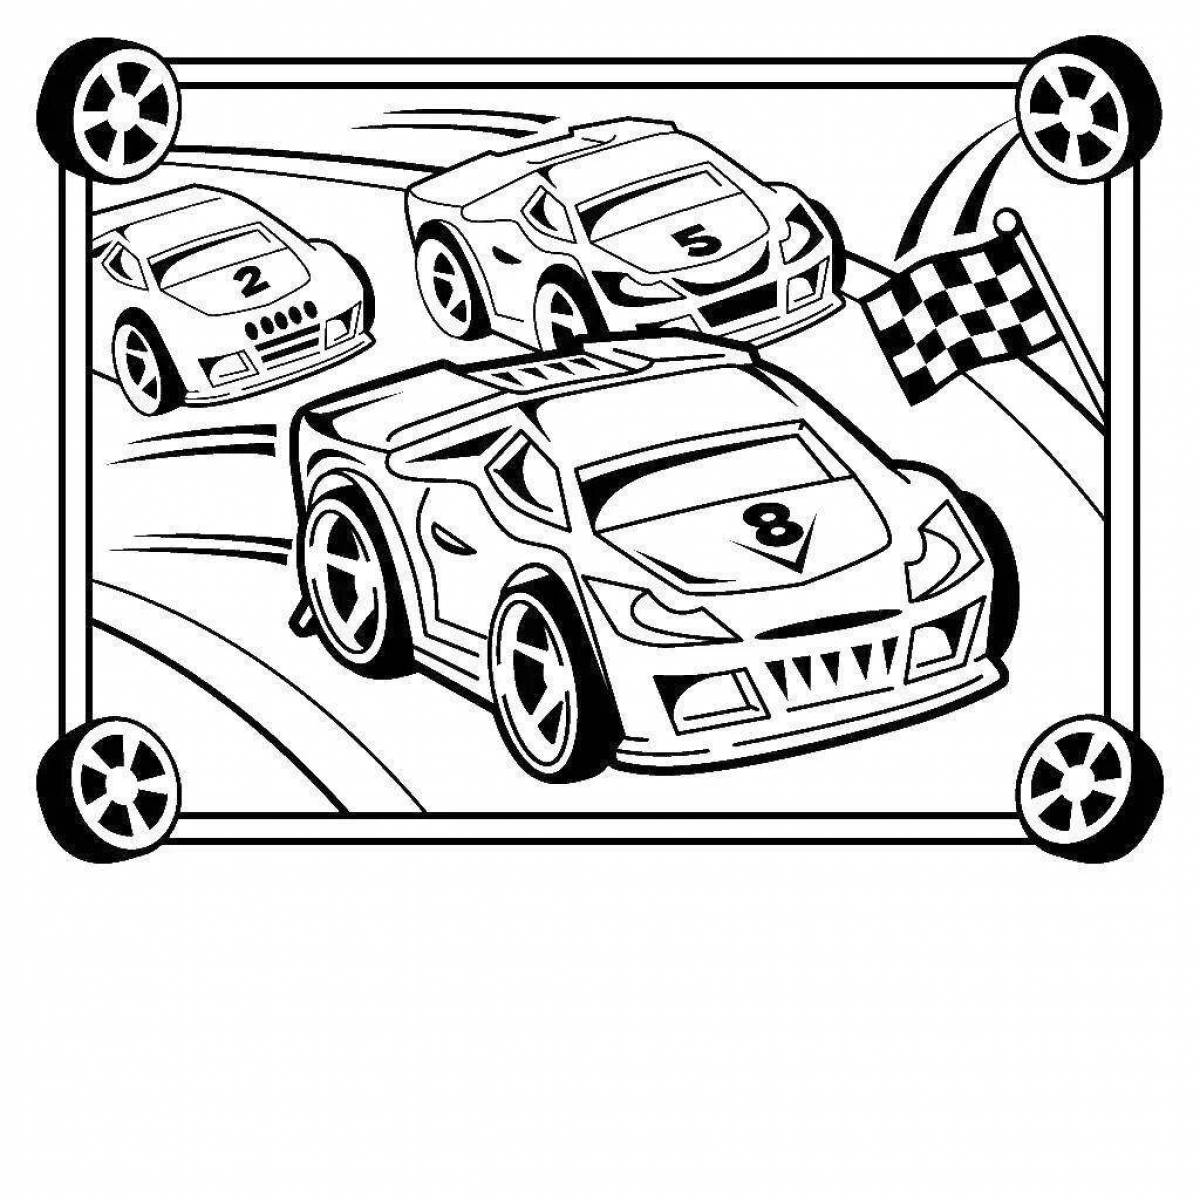 Coloring page racing car with artistic shading